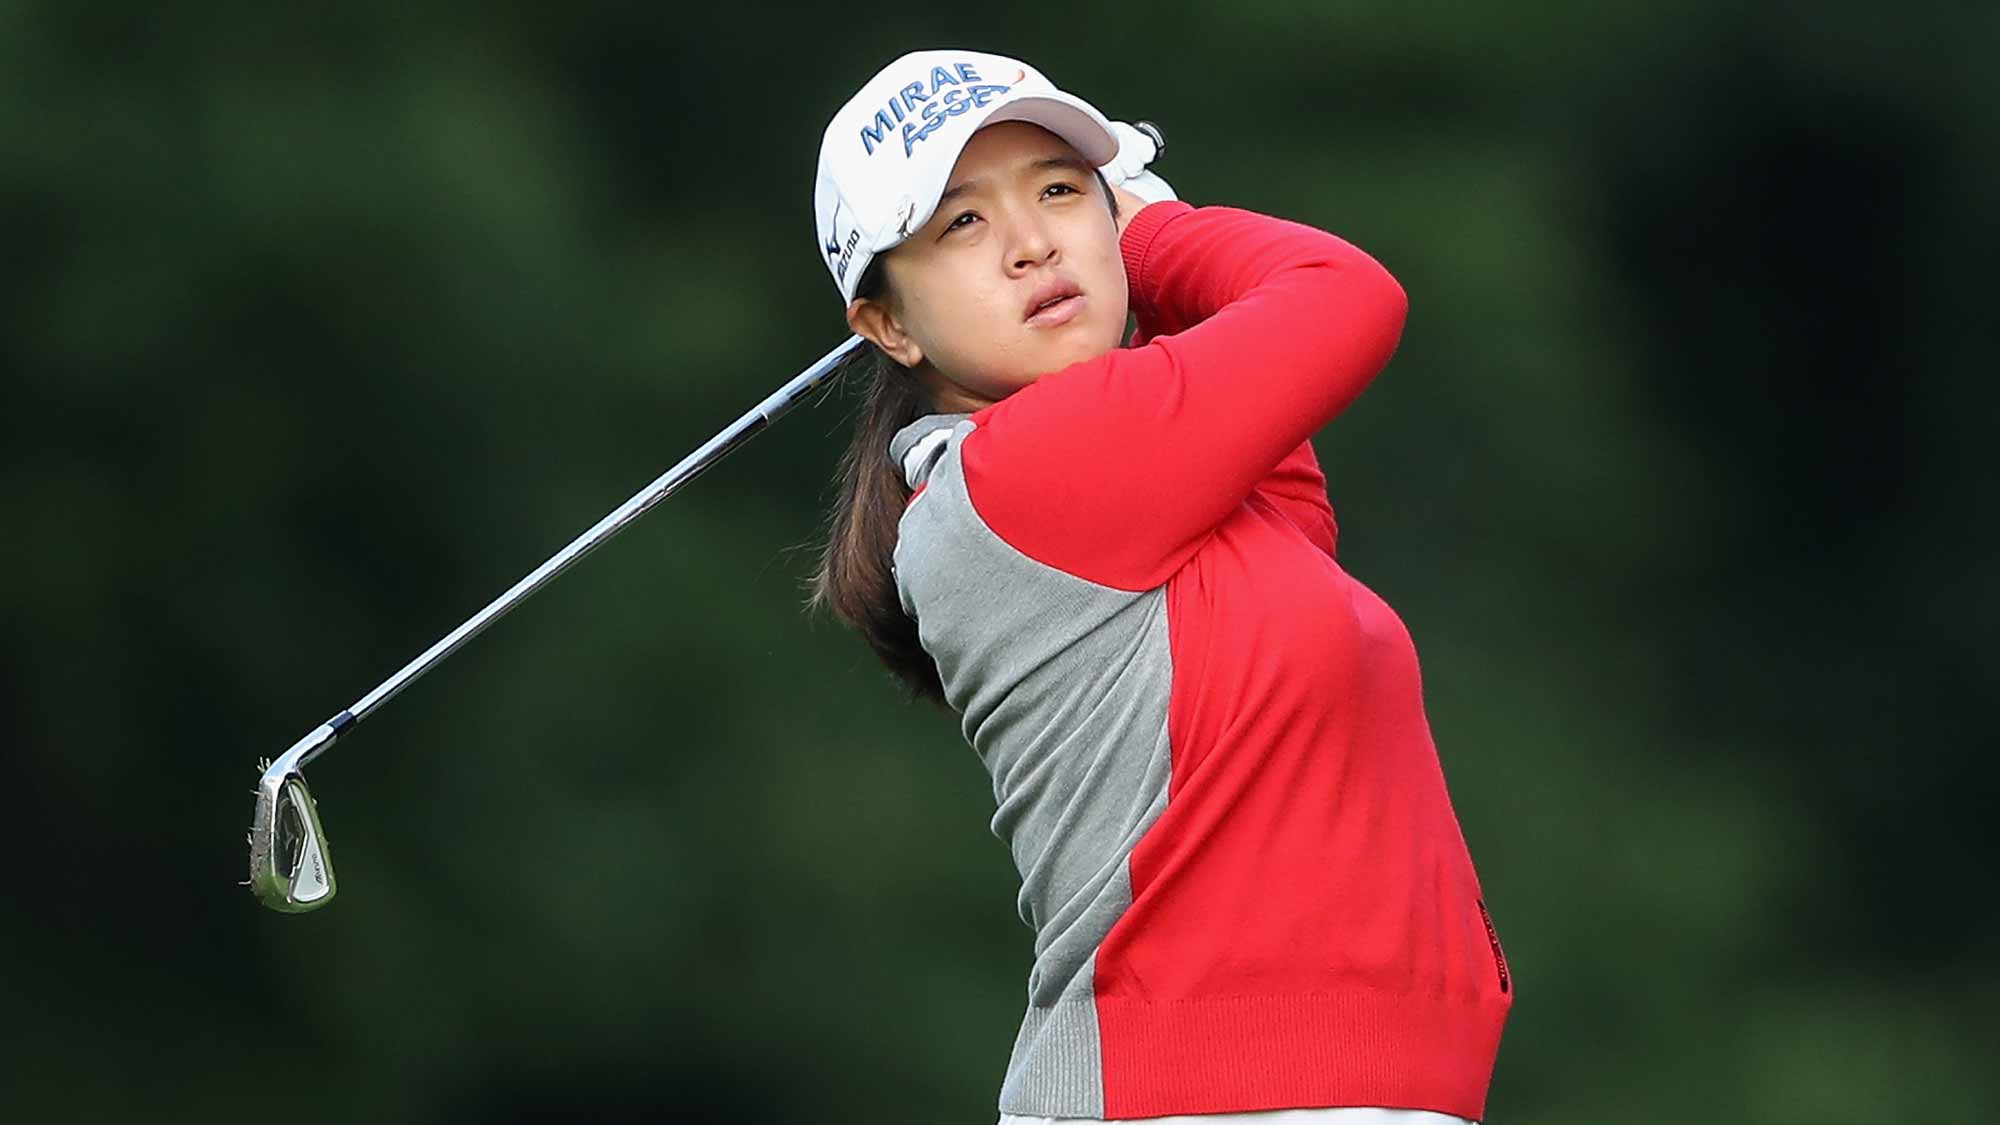 Sei Young Kim of Korea hits her 2nd shot on the 3rd hole during the first round of the 2016 Ricoh Women's British Open